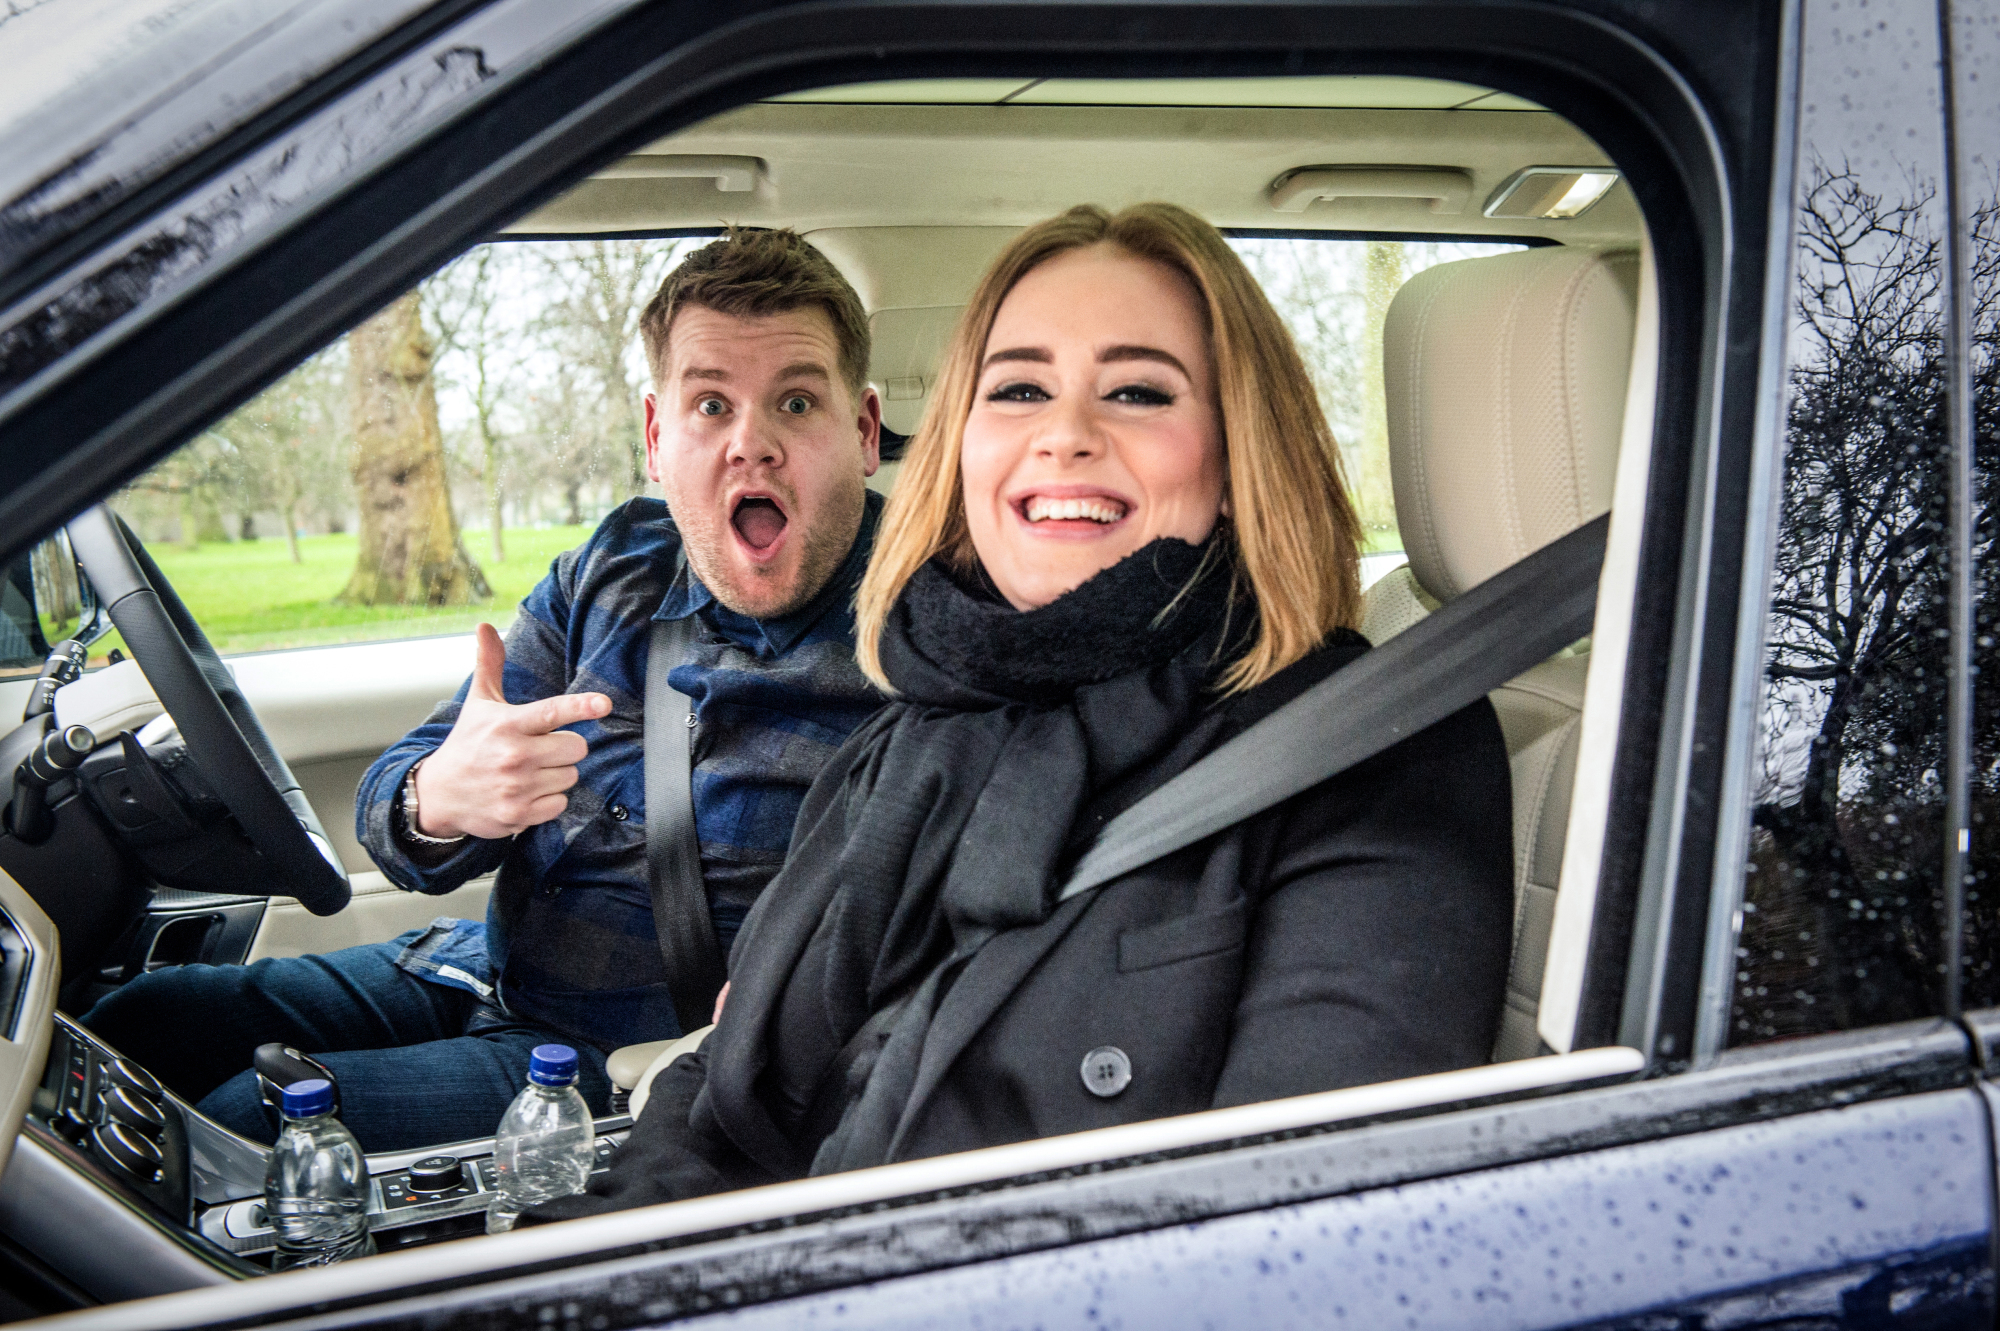 Adele joins James Corden for Carpool Karaoke on "The Late Late Show with James Corden," on Jan. 13th, 2016.